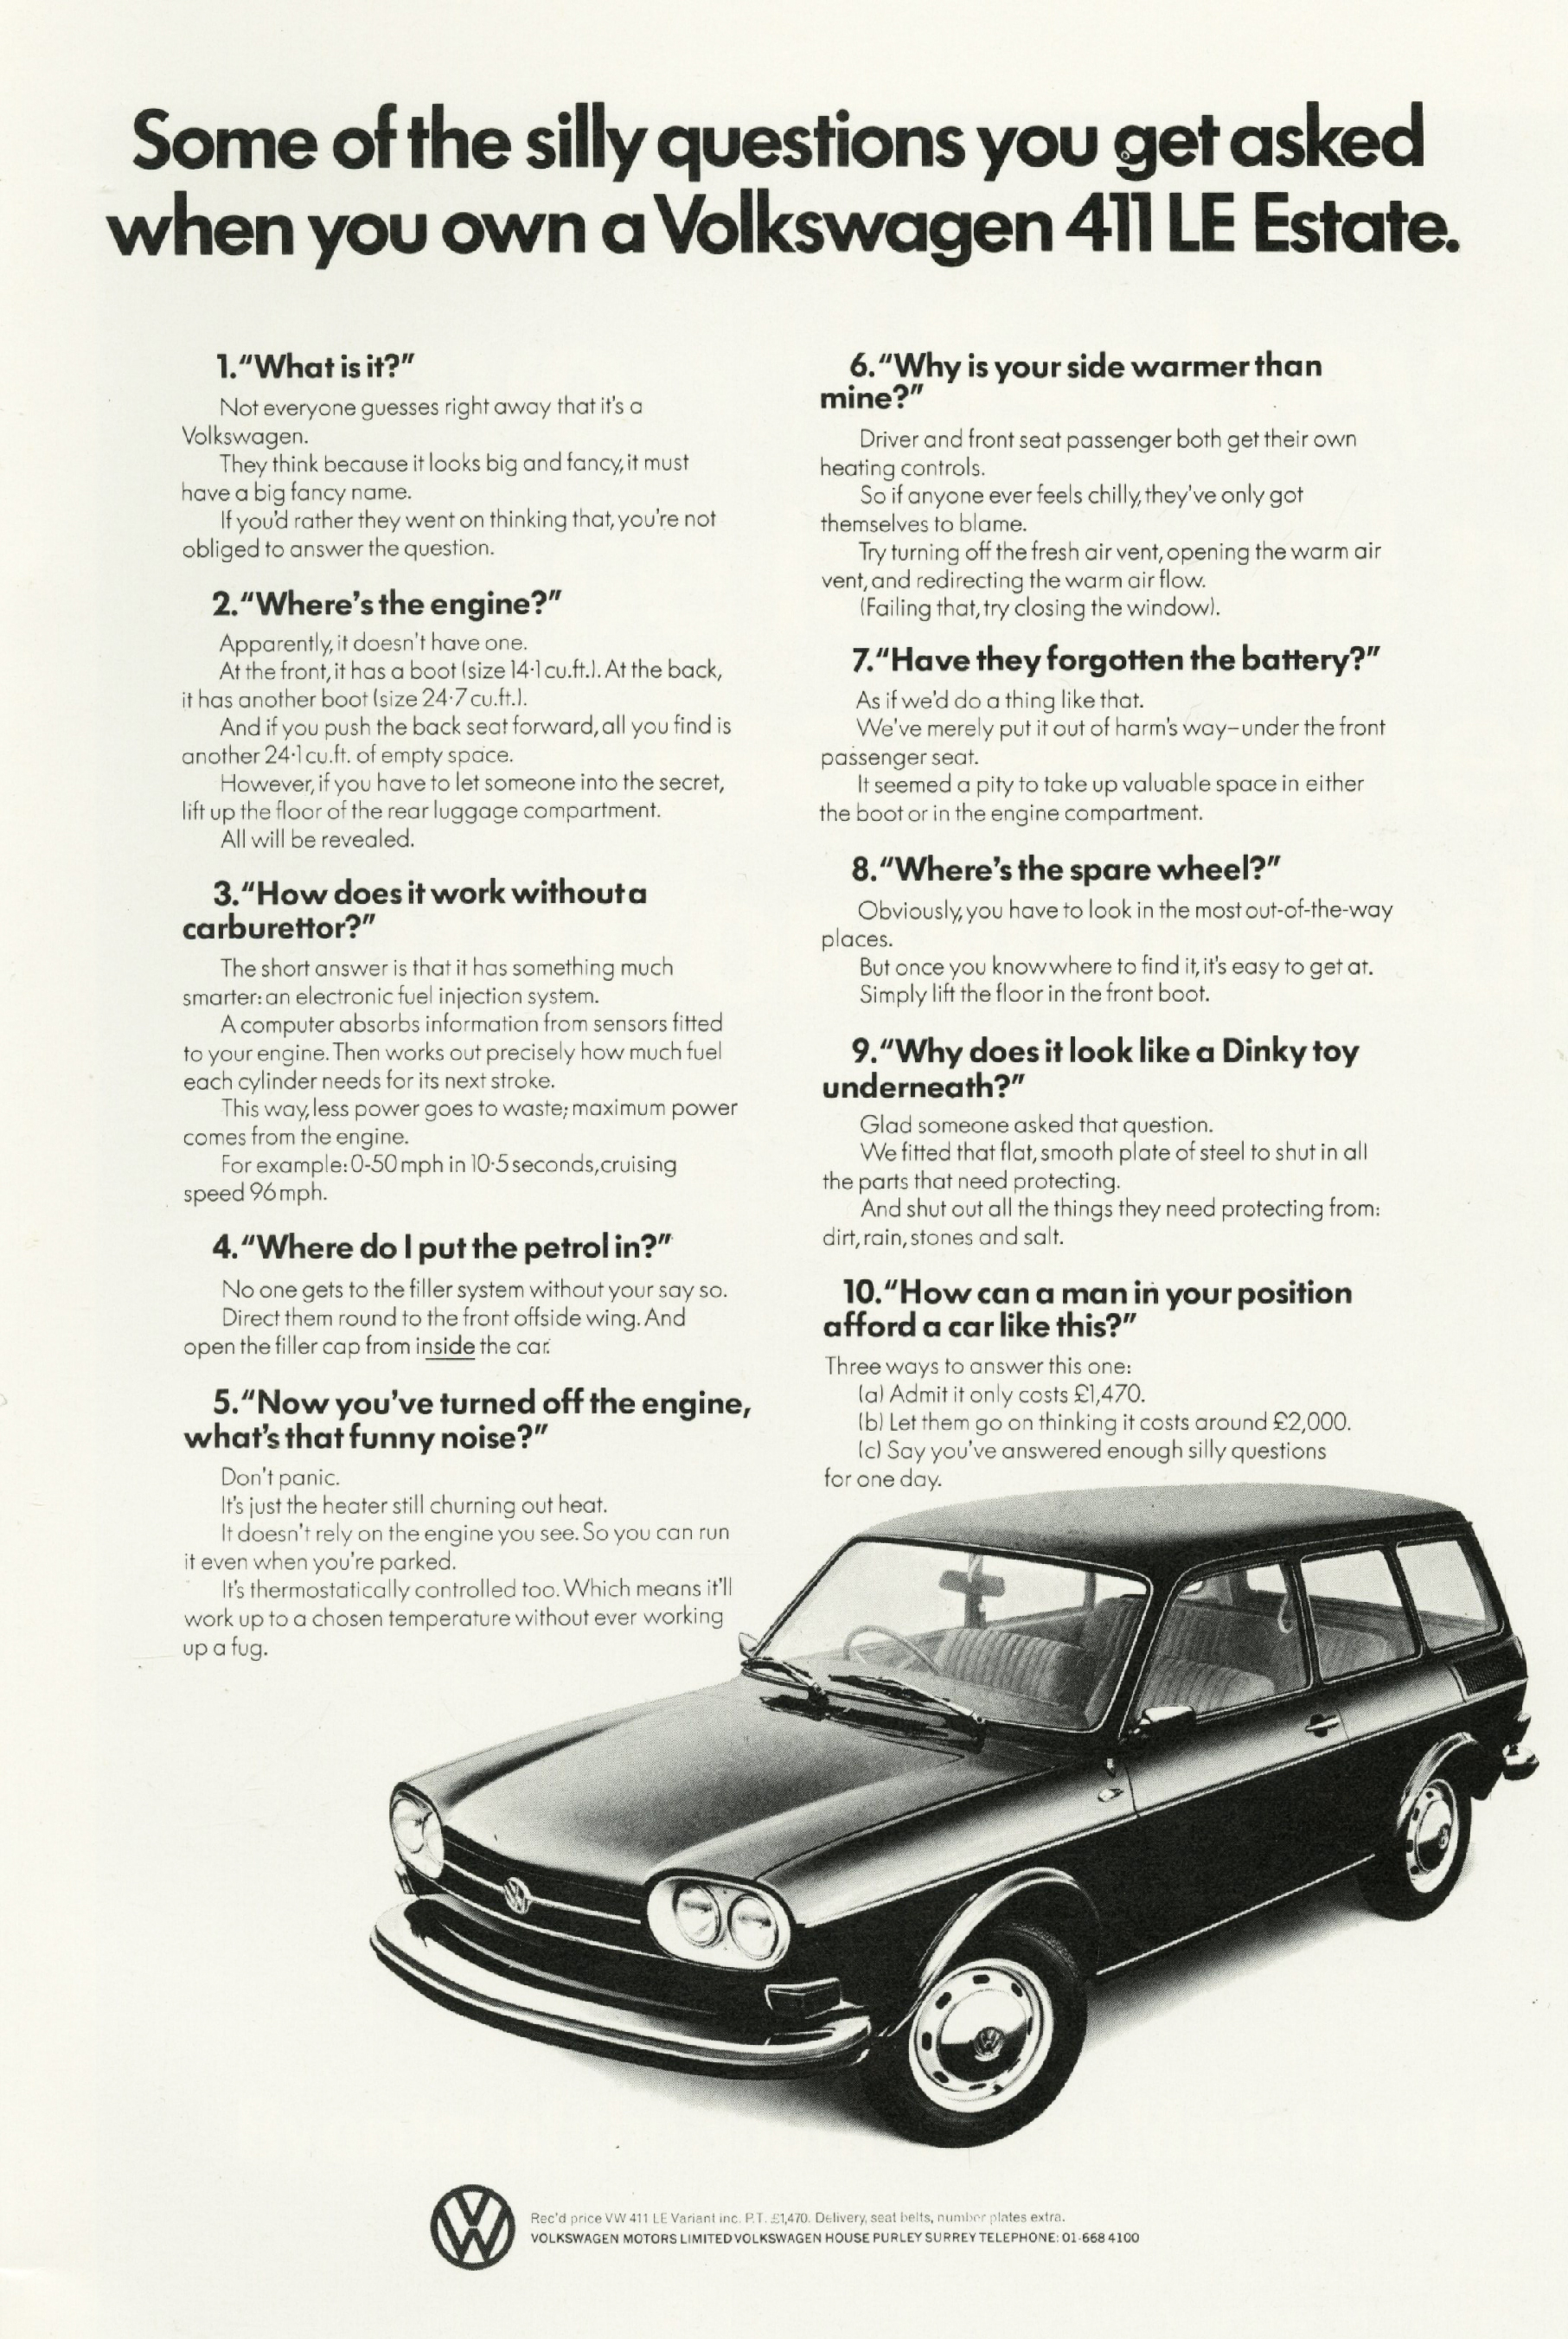 John O'D, VW 'Silly Questions'-01